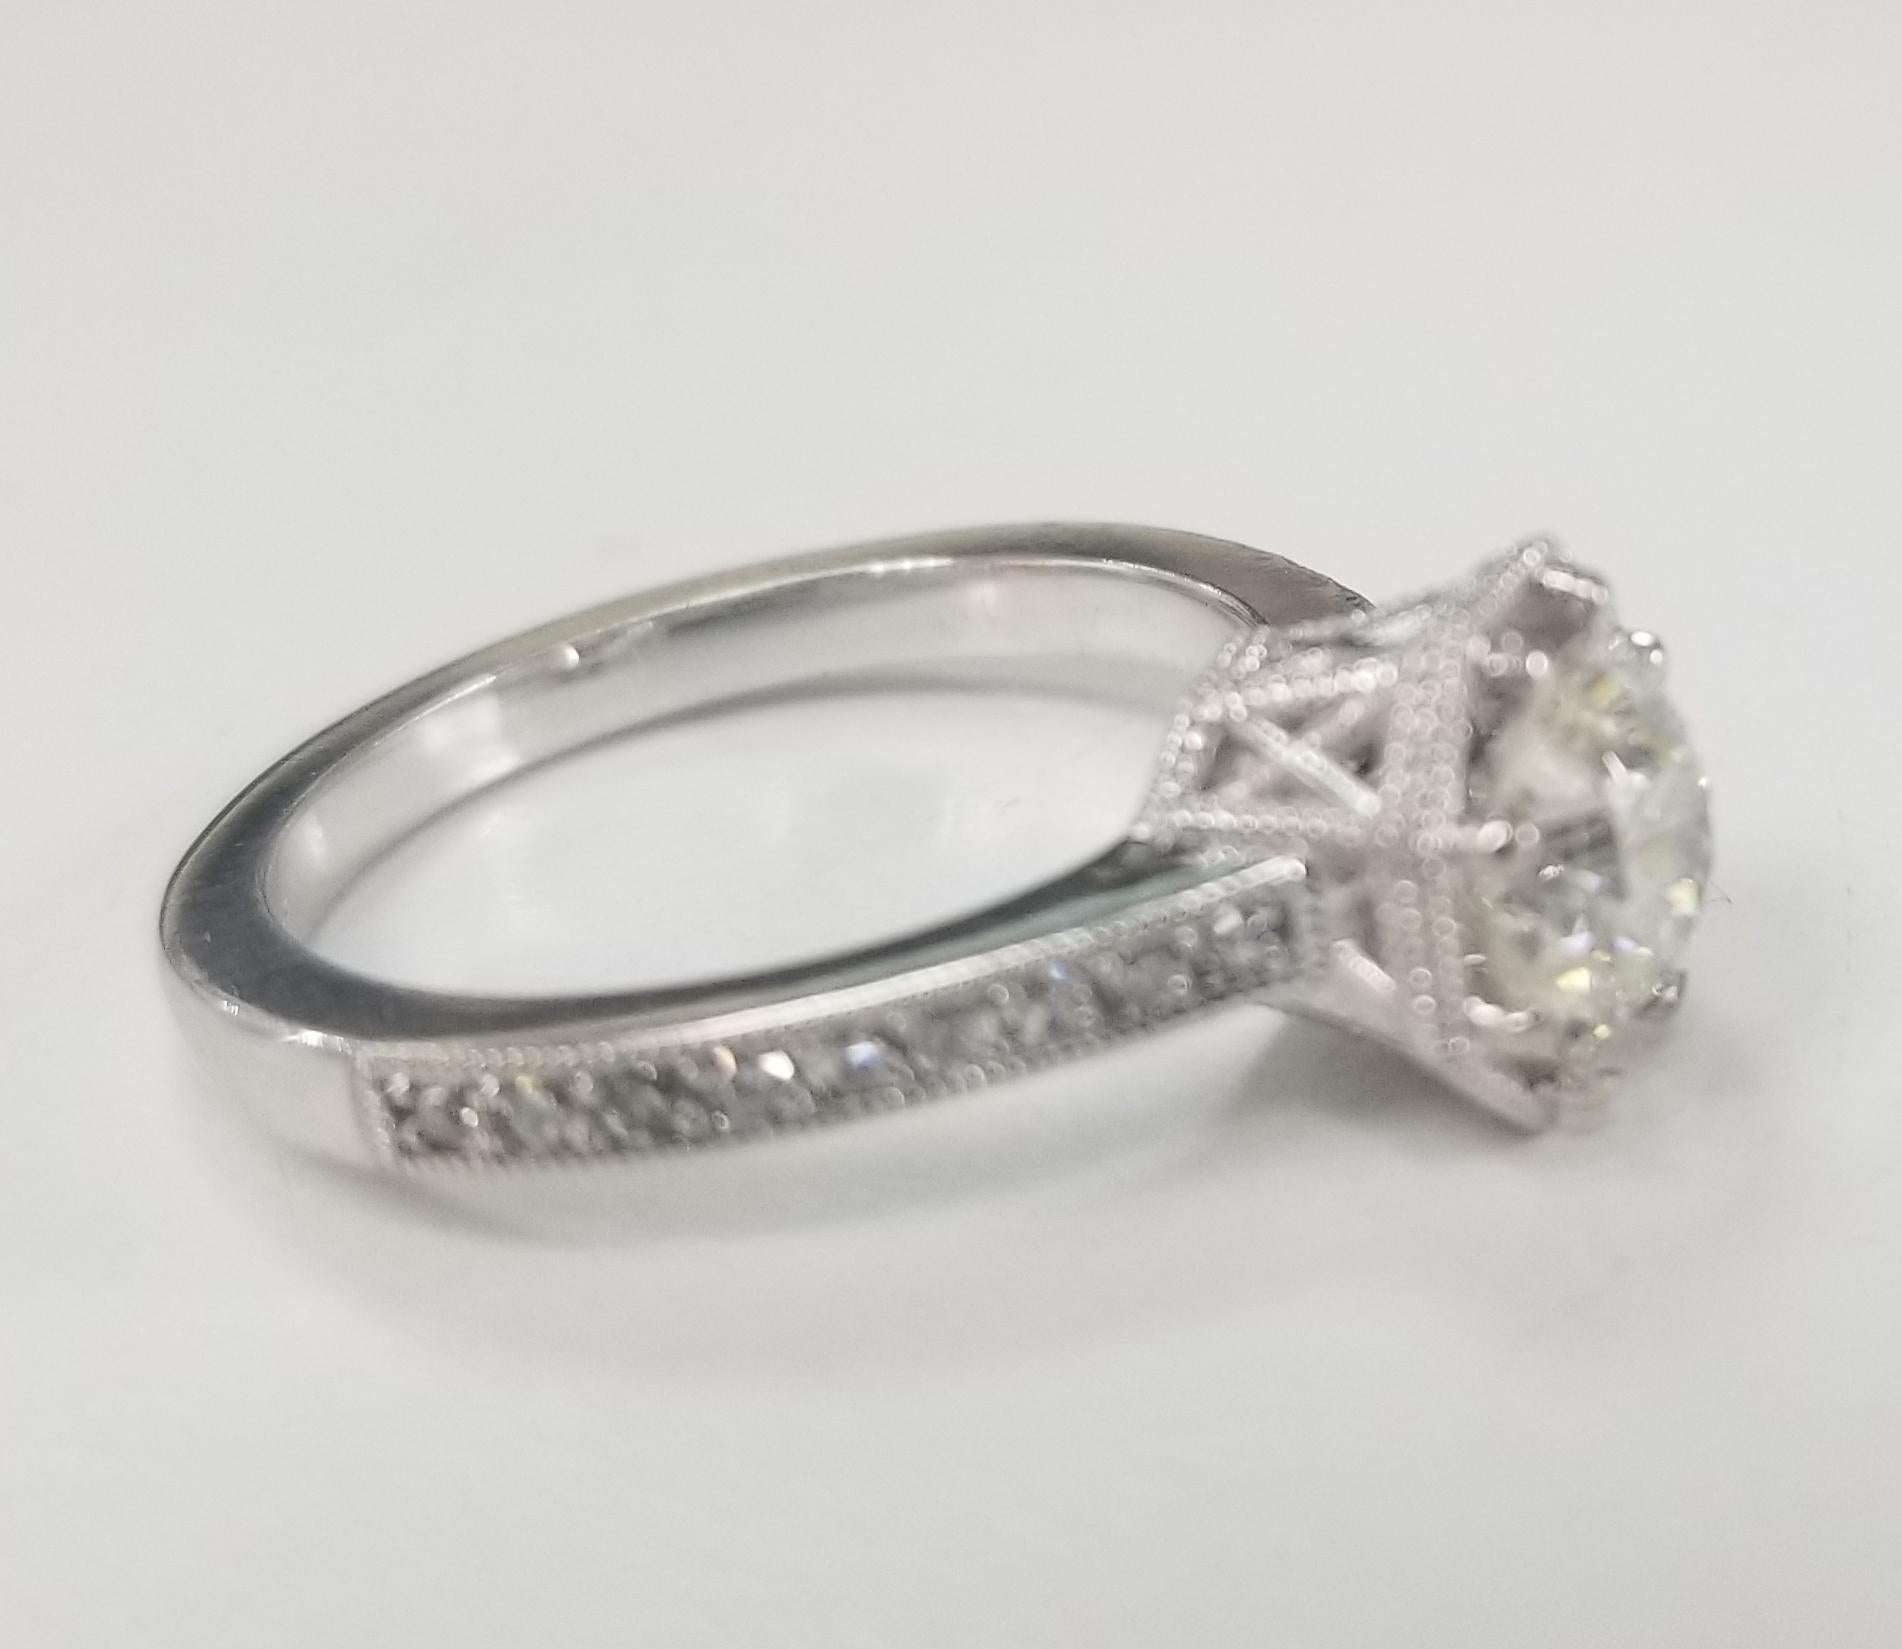  The ring has an engraving inside its shank with 18 single cut diamonds weighing .25pts.,. It has a current ring size of 6.75 US that can be resized for free. 

*Motivated to Sell – Please make a Fair Offer*

Specifications:
    main stone: